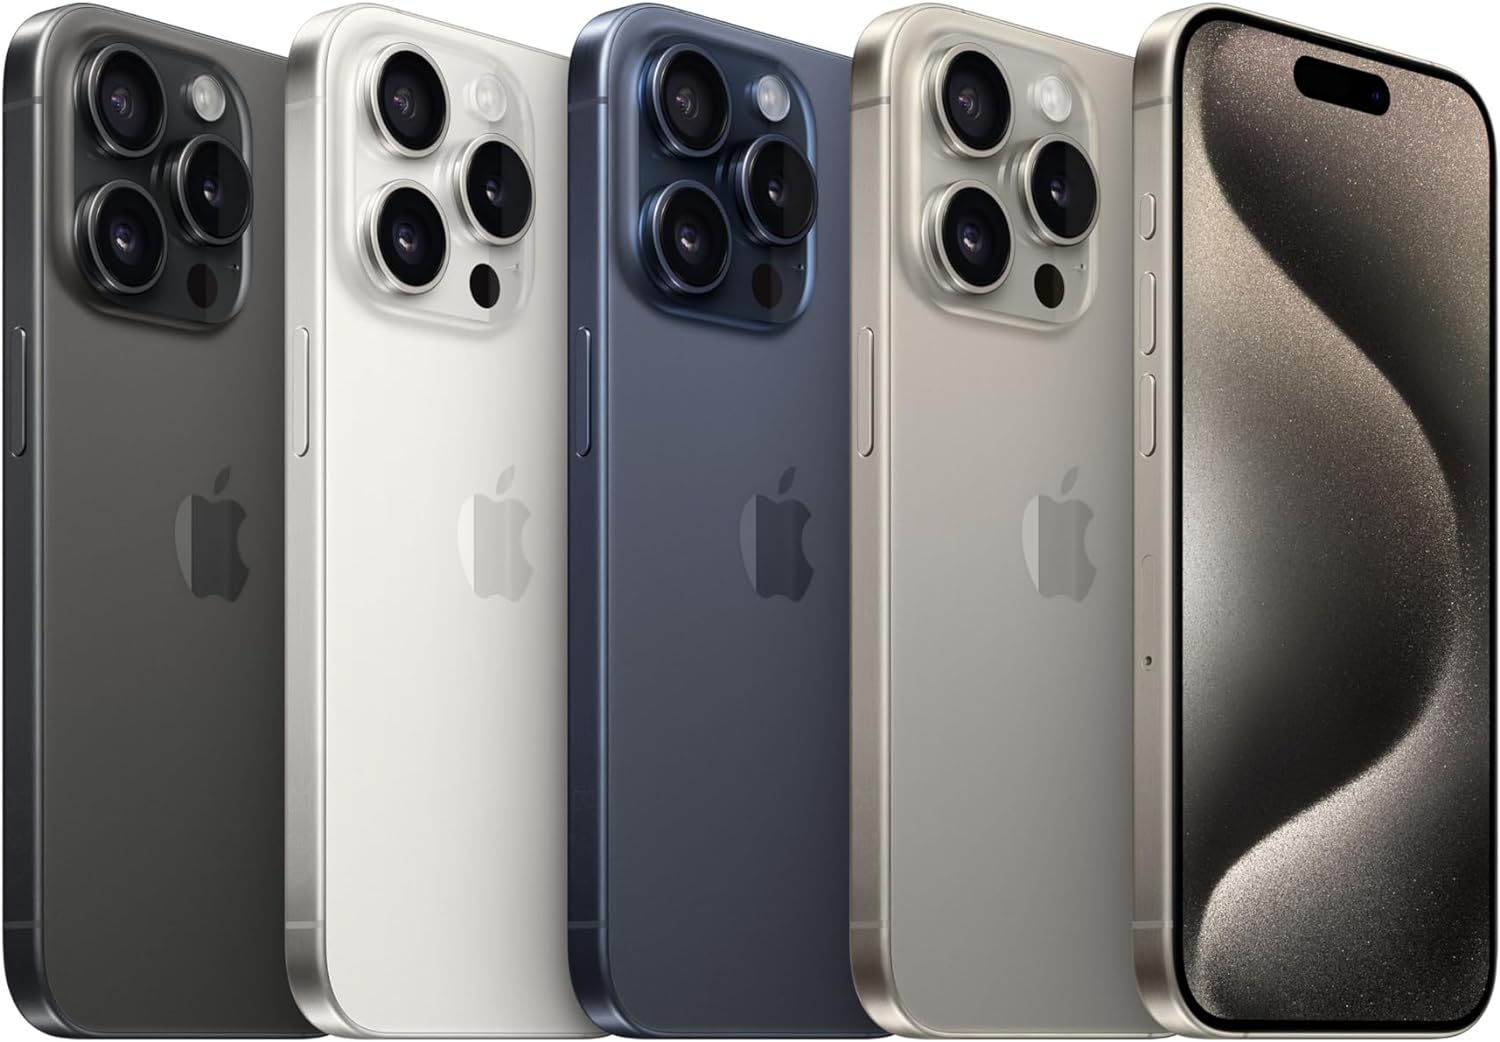 The image displays four smartphones of the same model, each with a different color finish. They are positioned with their rear-facing cameras visible on the left, then sequentially rotated to show the sides and the front screen of the last phone on the right. The design suggests that these are modern smartphones with a multi-lens camera system, likely a premium model. The Apple logo on the back of each device indicates that these are iPhones.